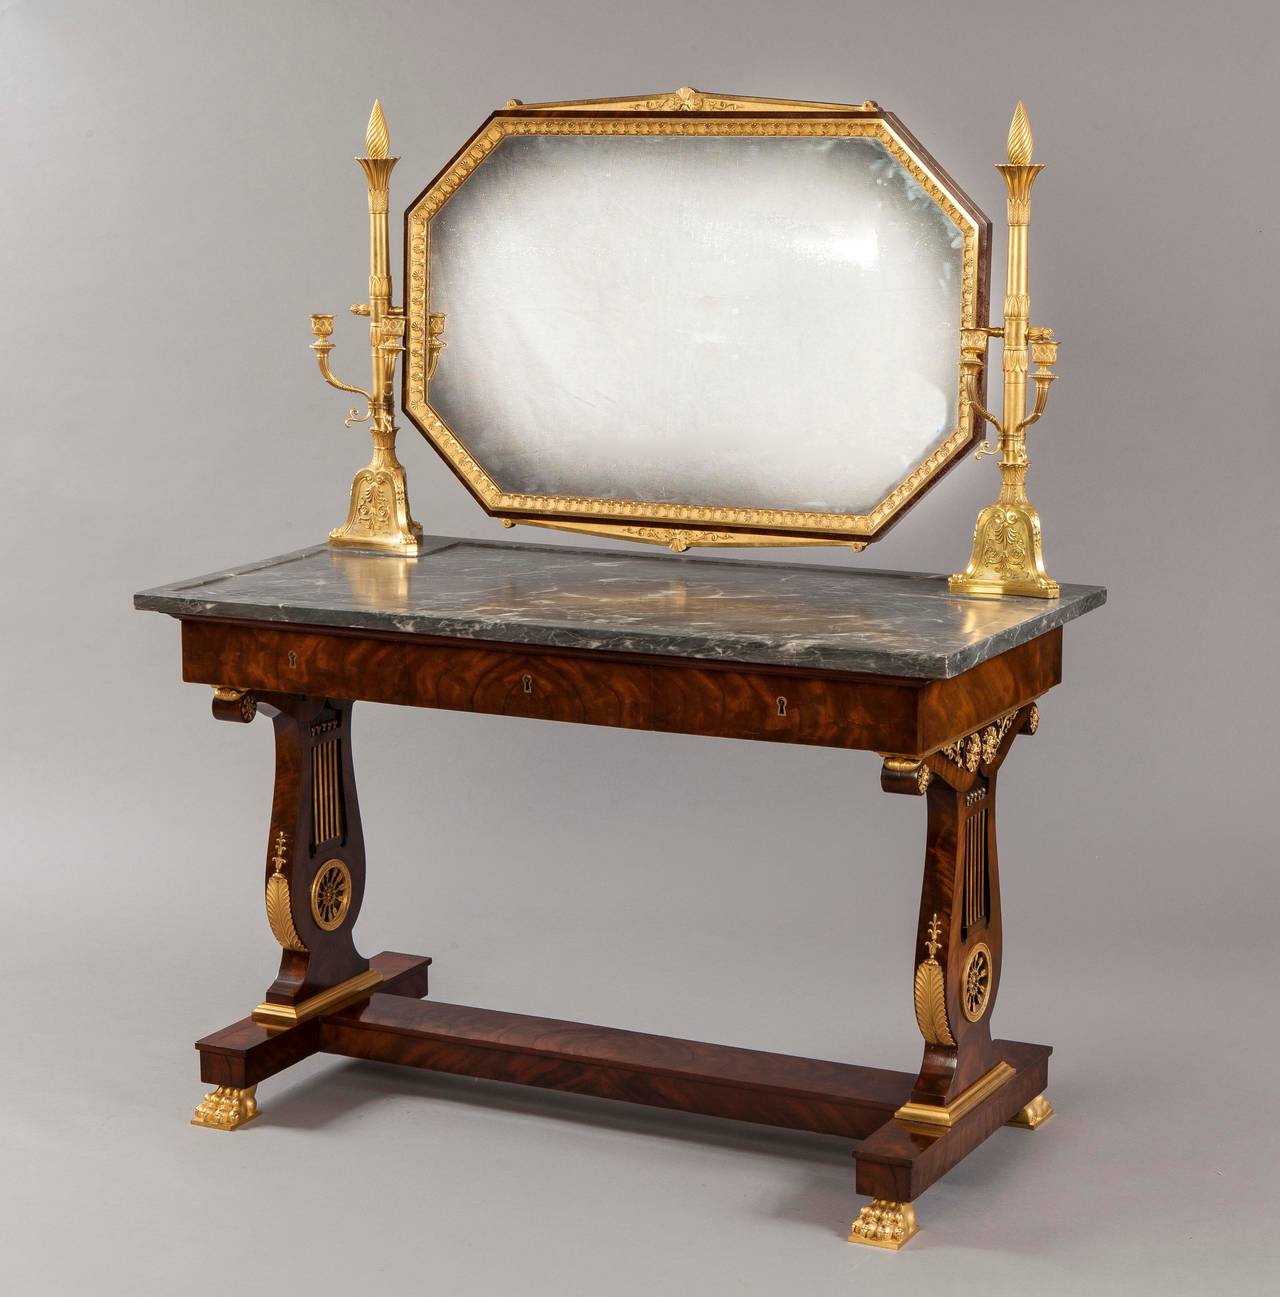 Constructed using a fine Honduras mahogany with gilt highlights, Bleu Tarquin marble and richly dressed with fire gilt ormolu mounts of the highest quality. The table of lyre end support design, rising from ormolu claw feet, conjoined with a